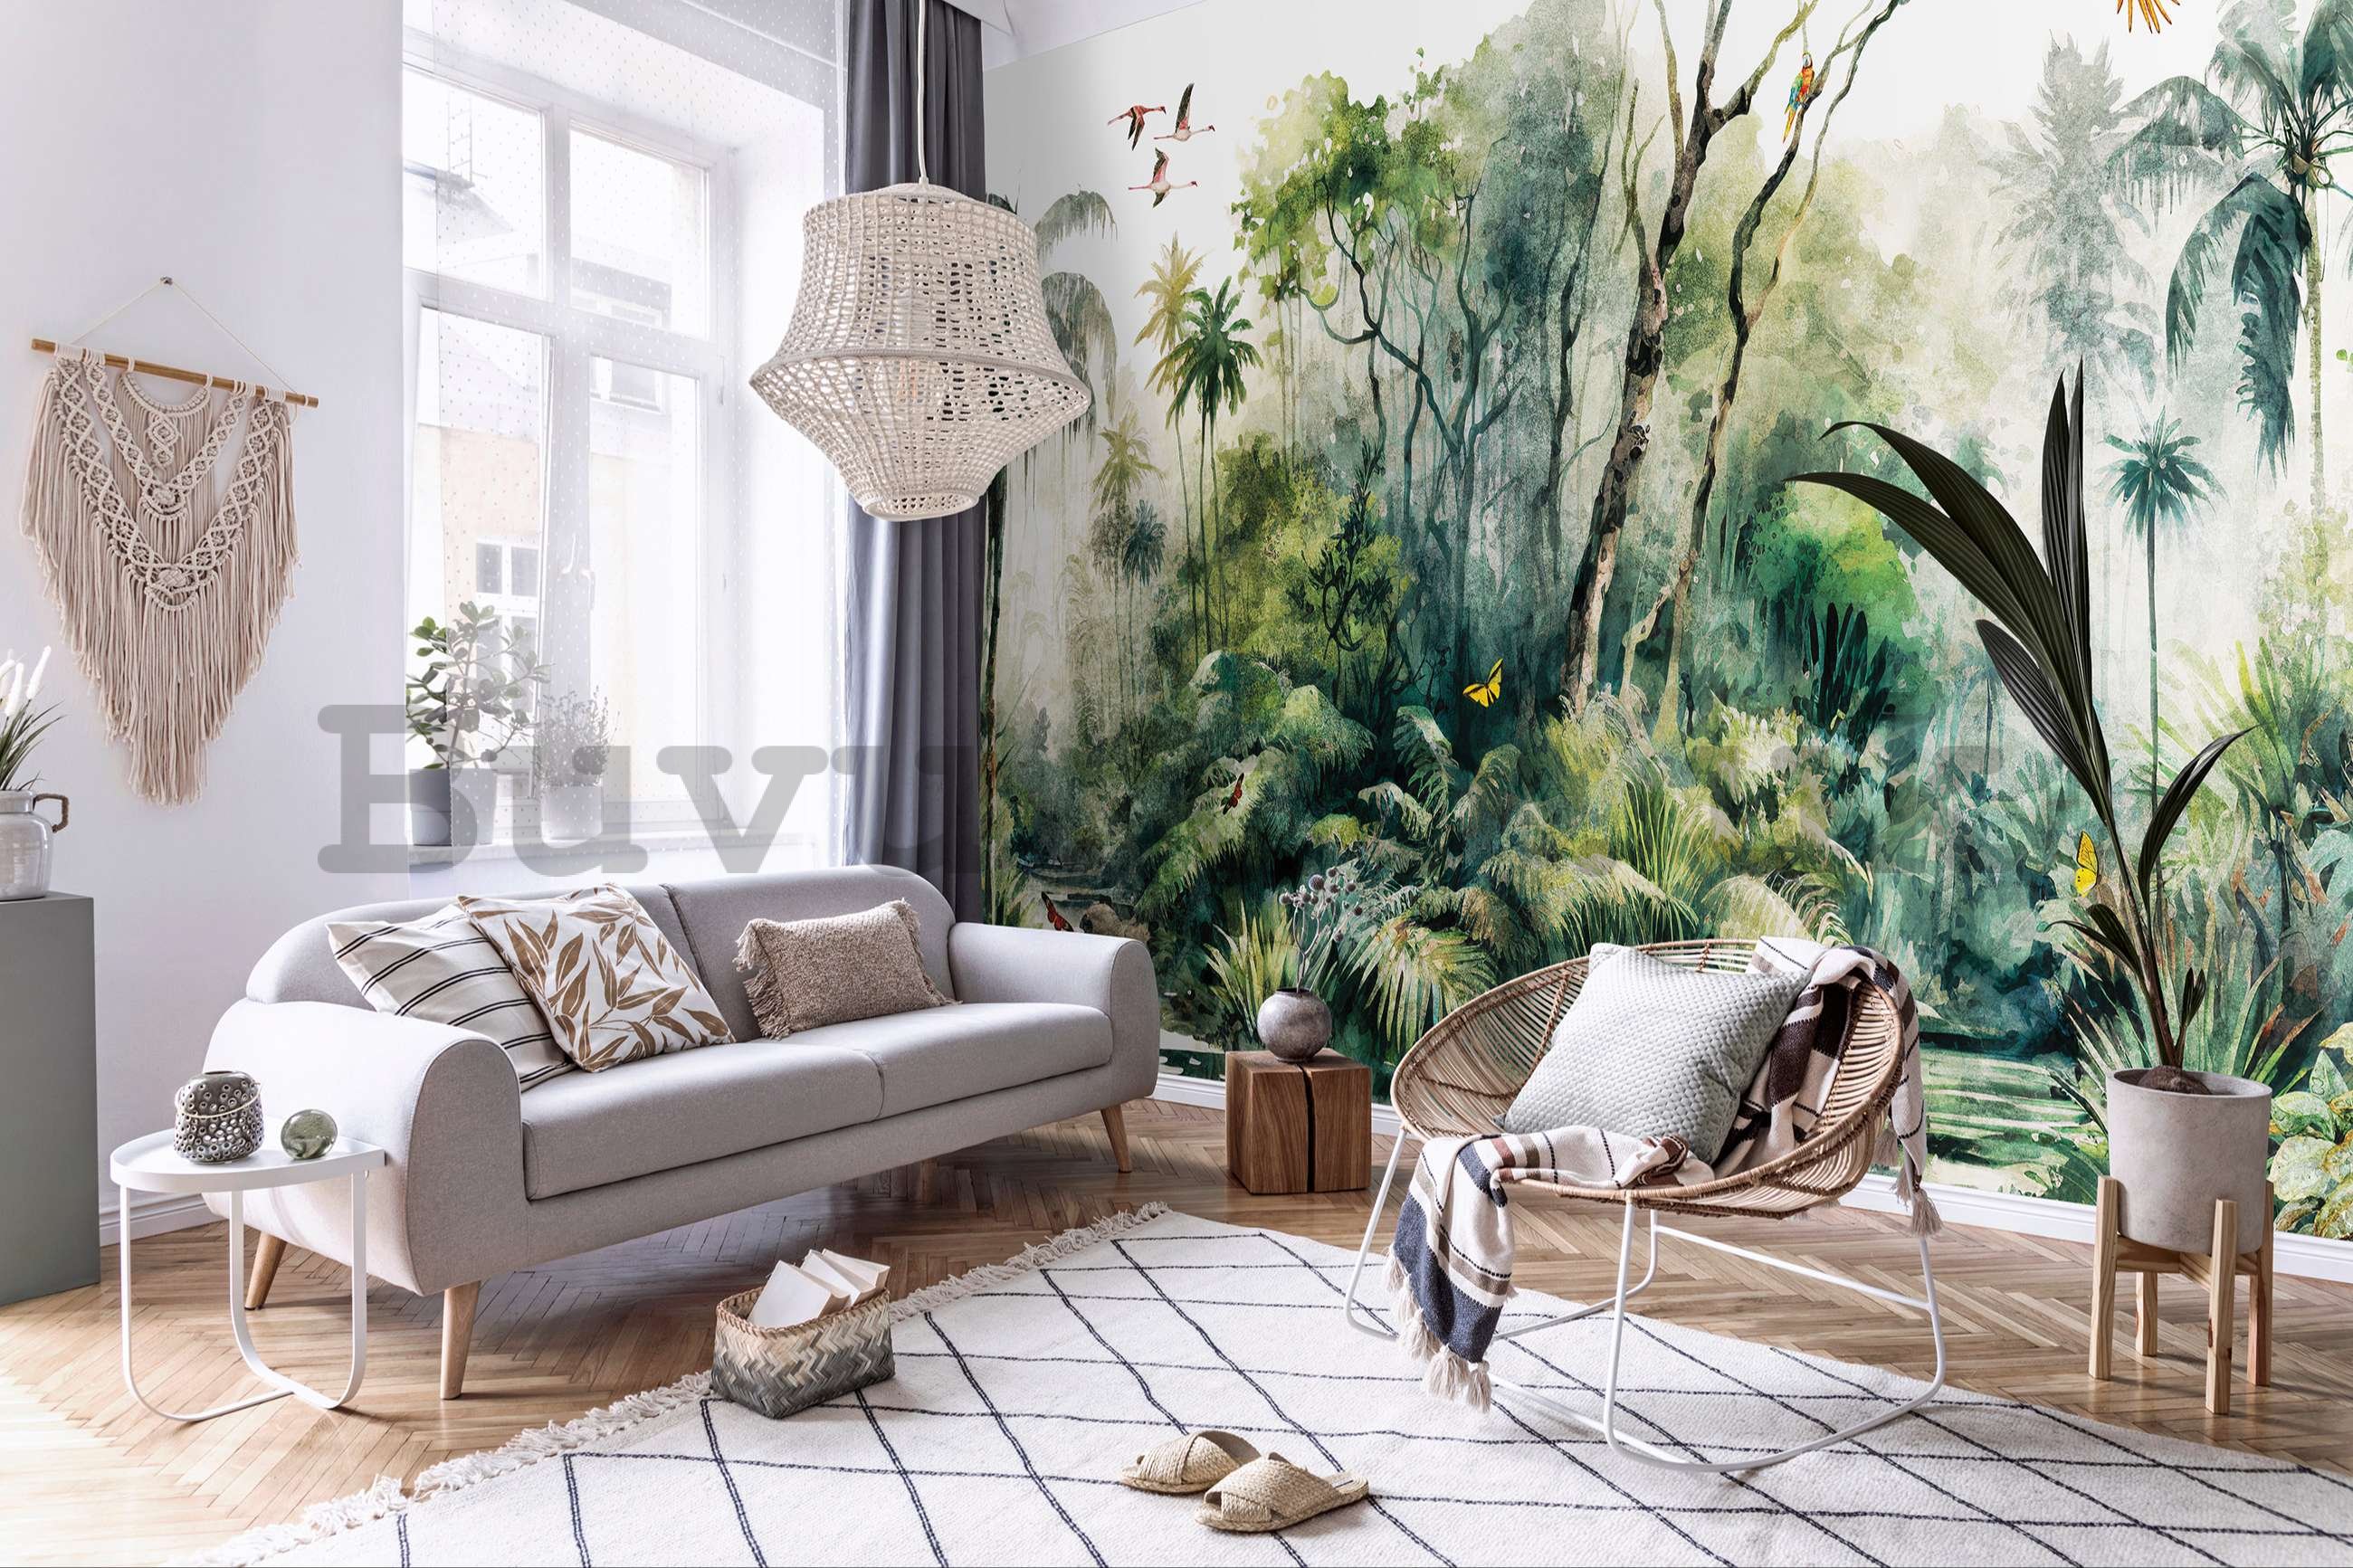 Wall mural vlies: In the rainforest (painted) - 416x254 cm